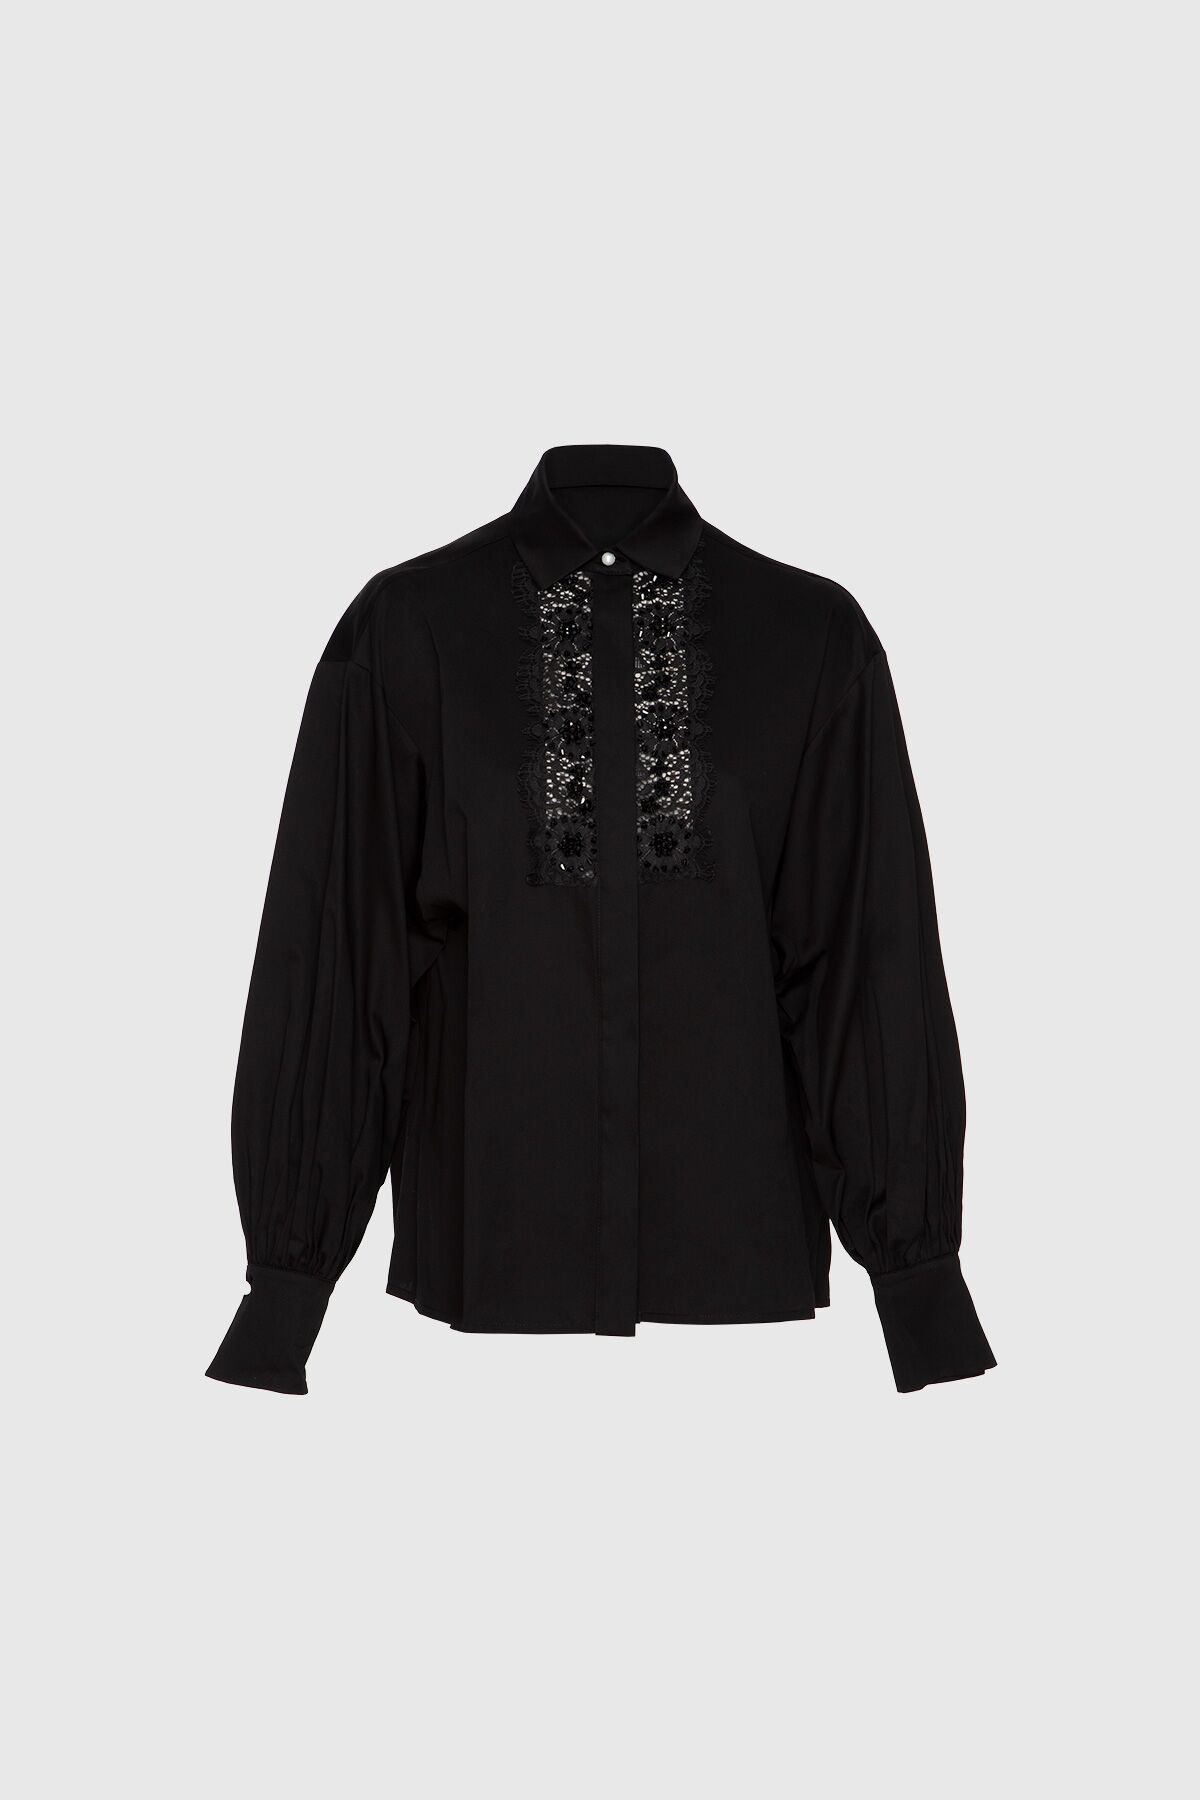  GIZIA - Lace And Embroidered Detailed Voluminous Sleeve Black Poplin Shirt